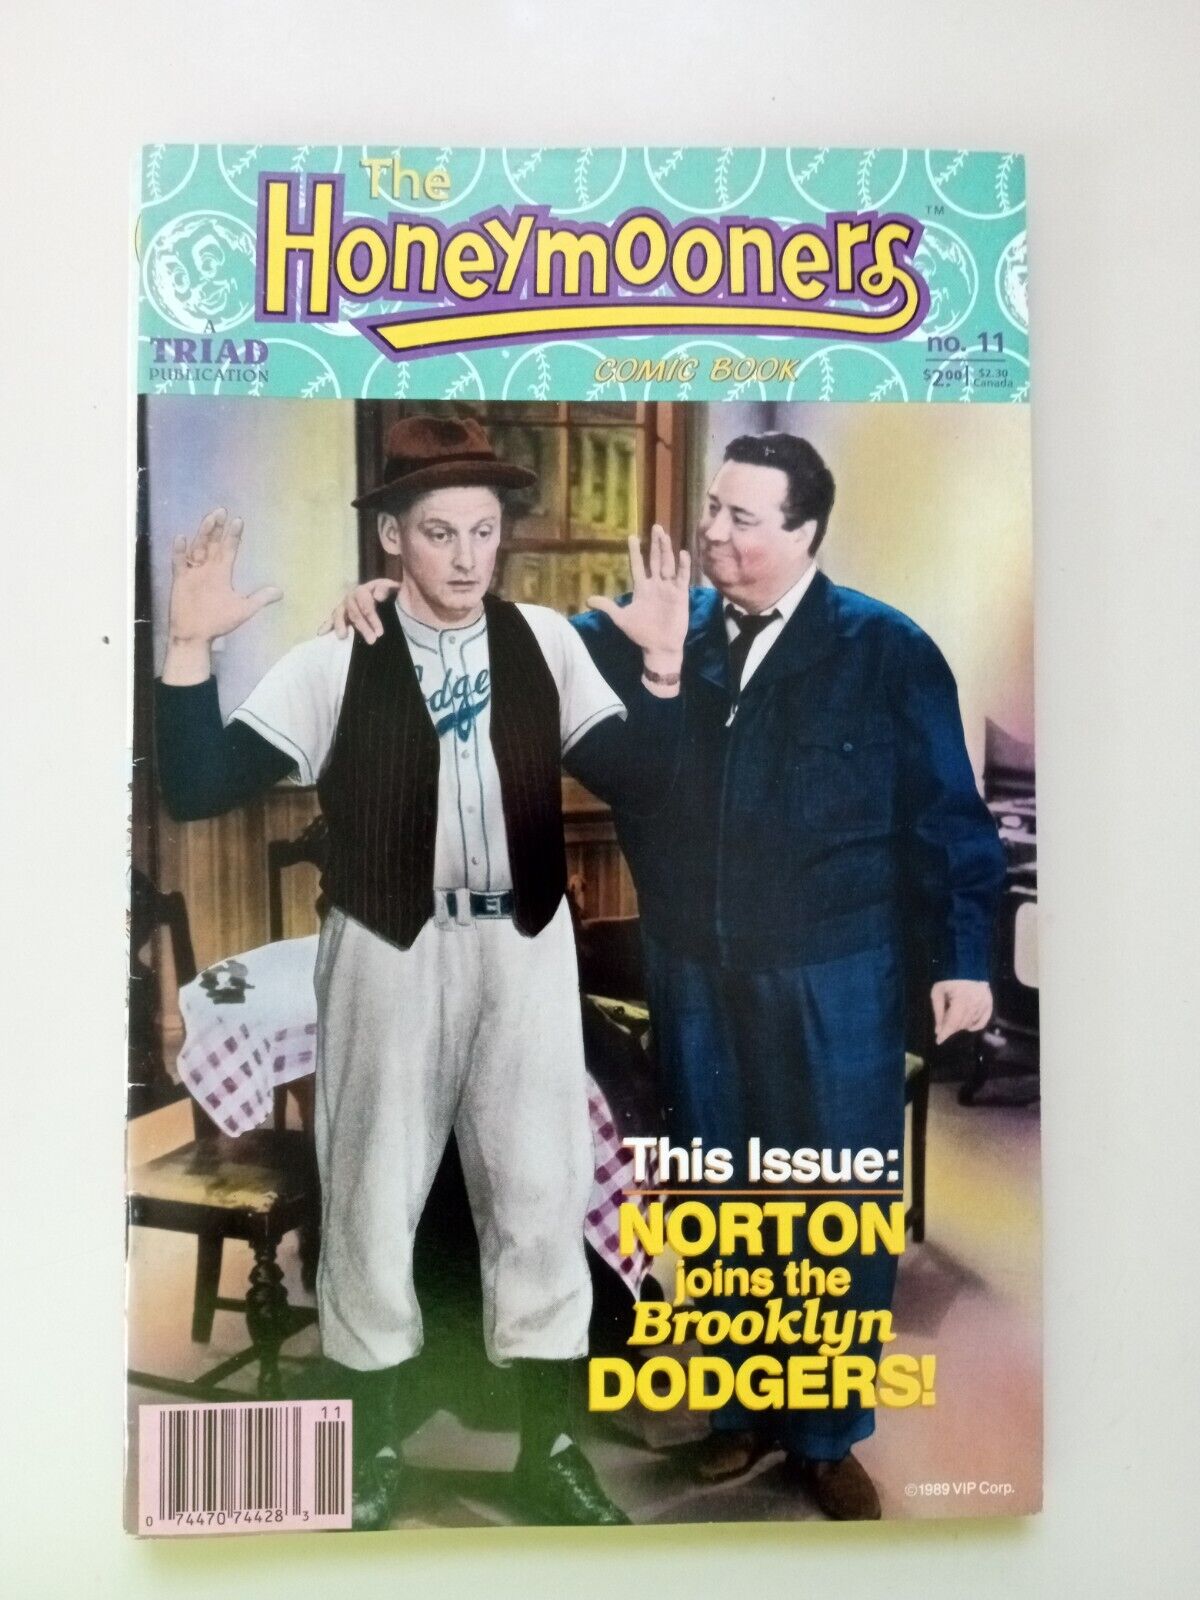 VINTAGE LOT OF 4 The Honeymooners Comic Books SEE PHOTOS FOR TITLES